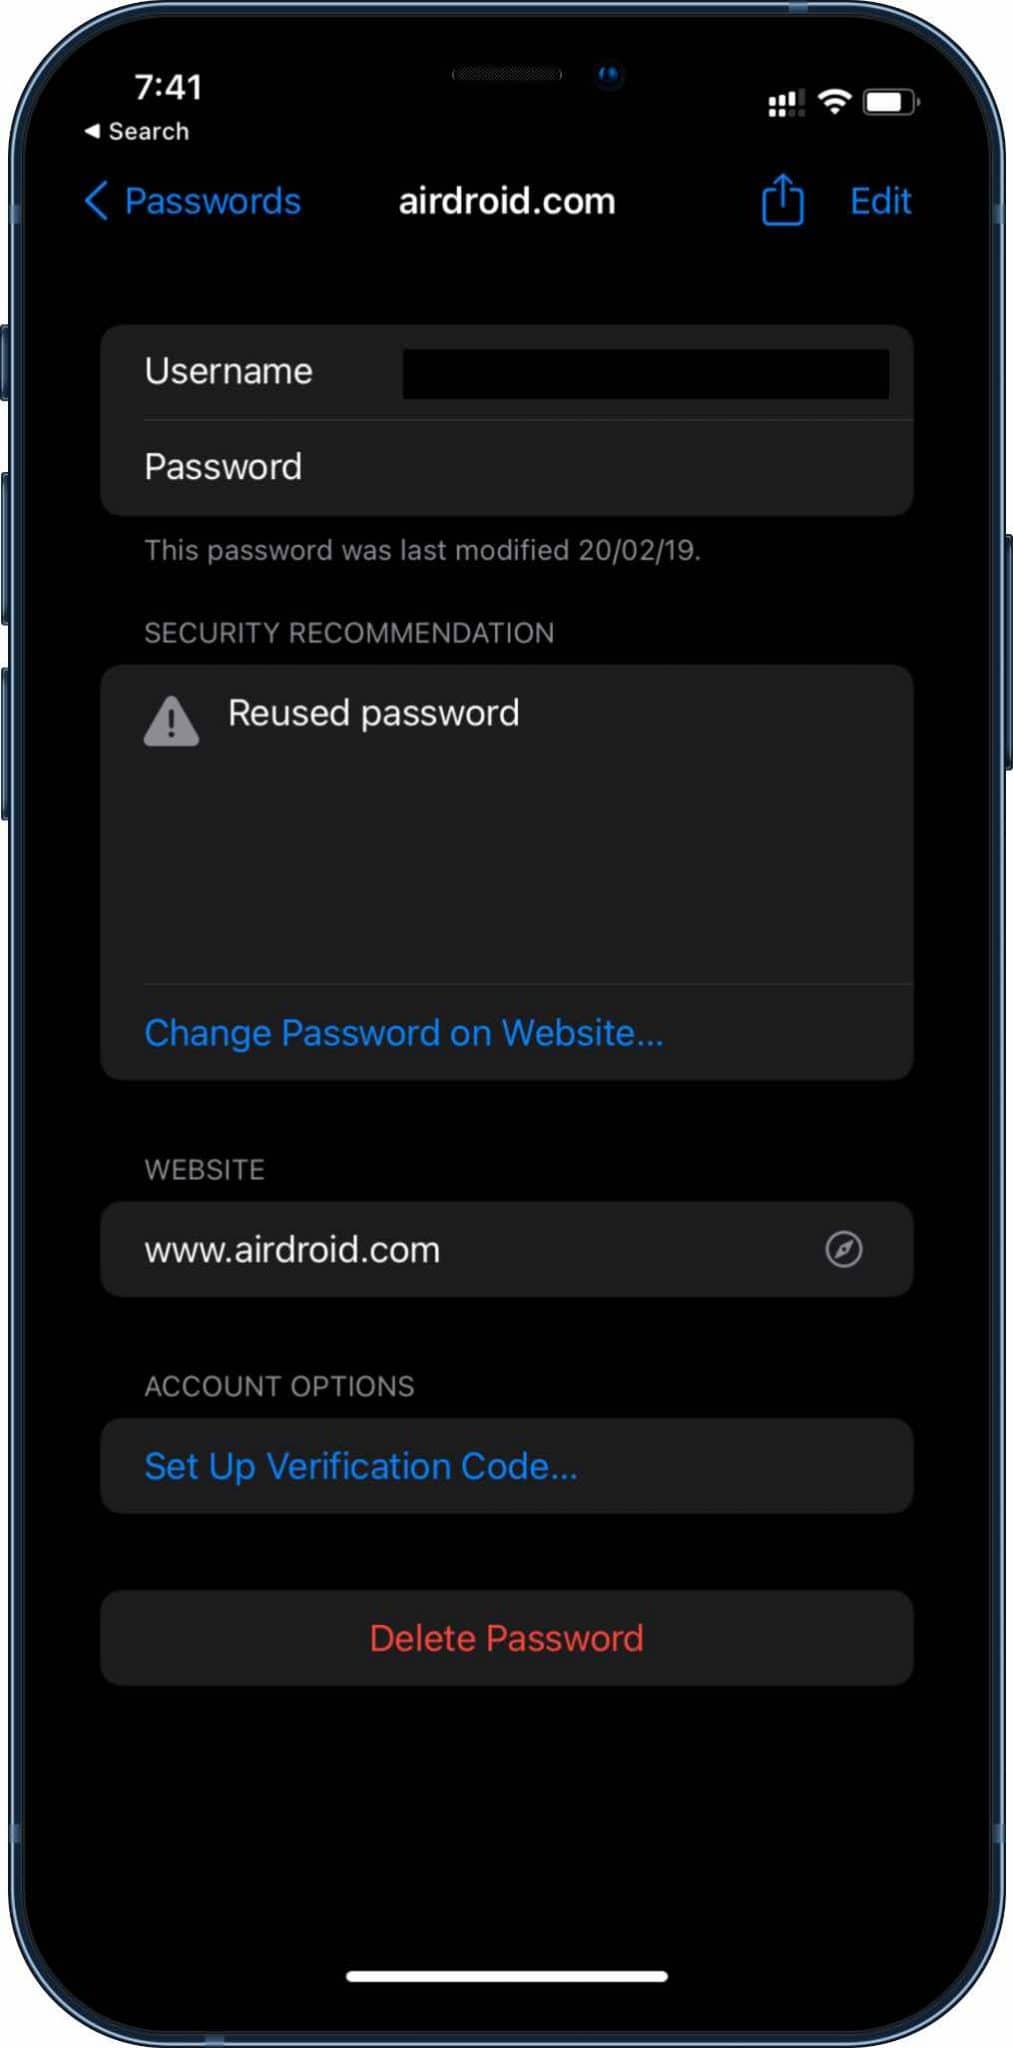 authenticator for iCloud keychain